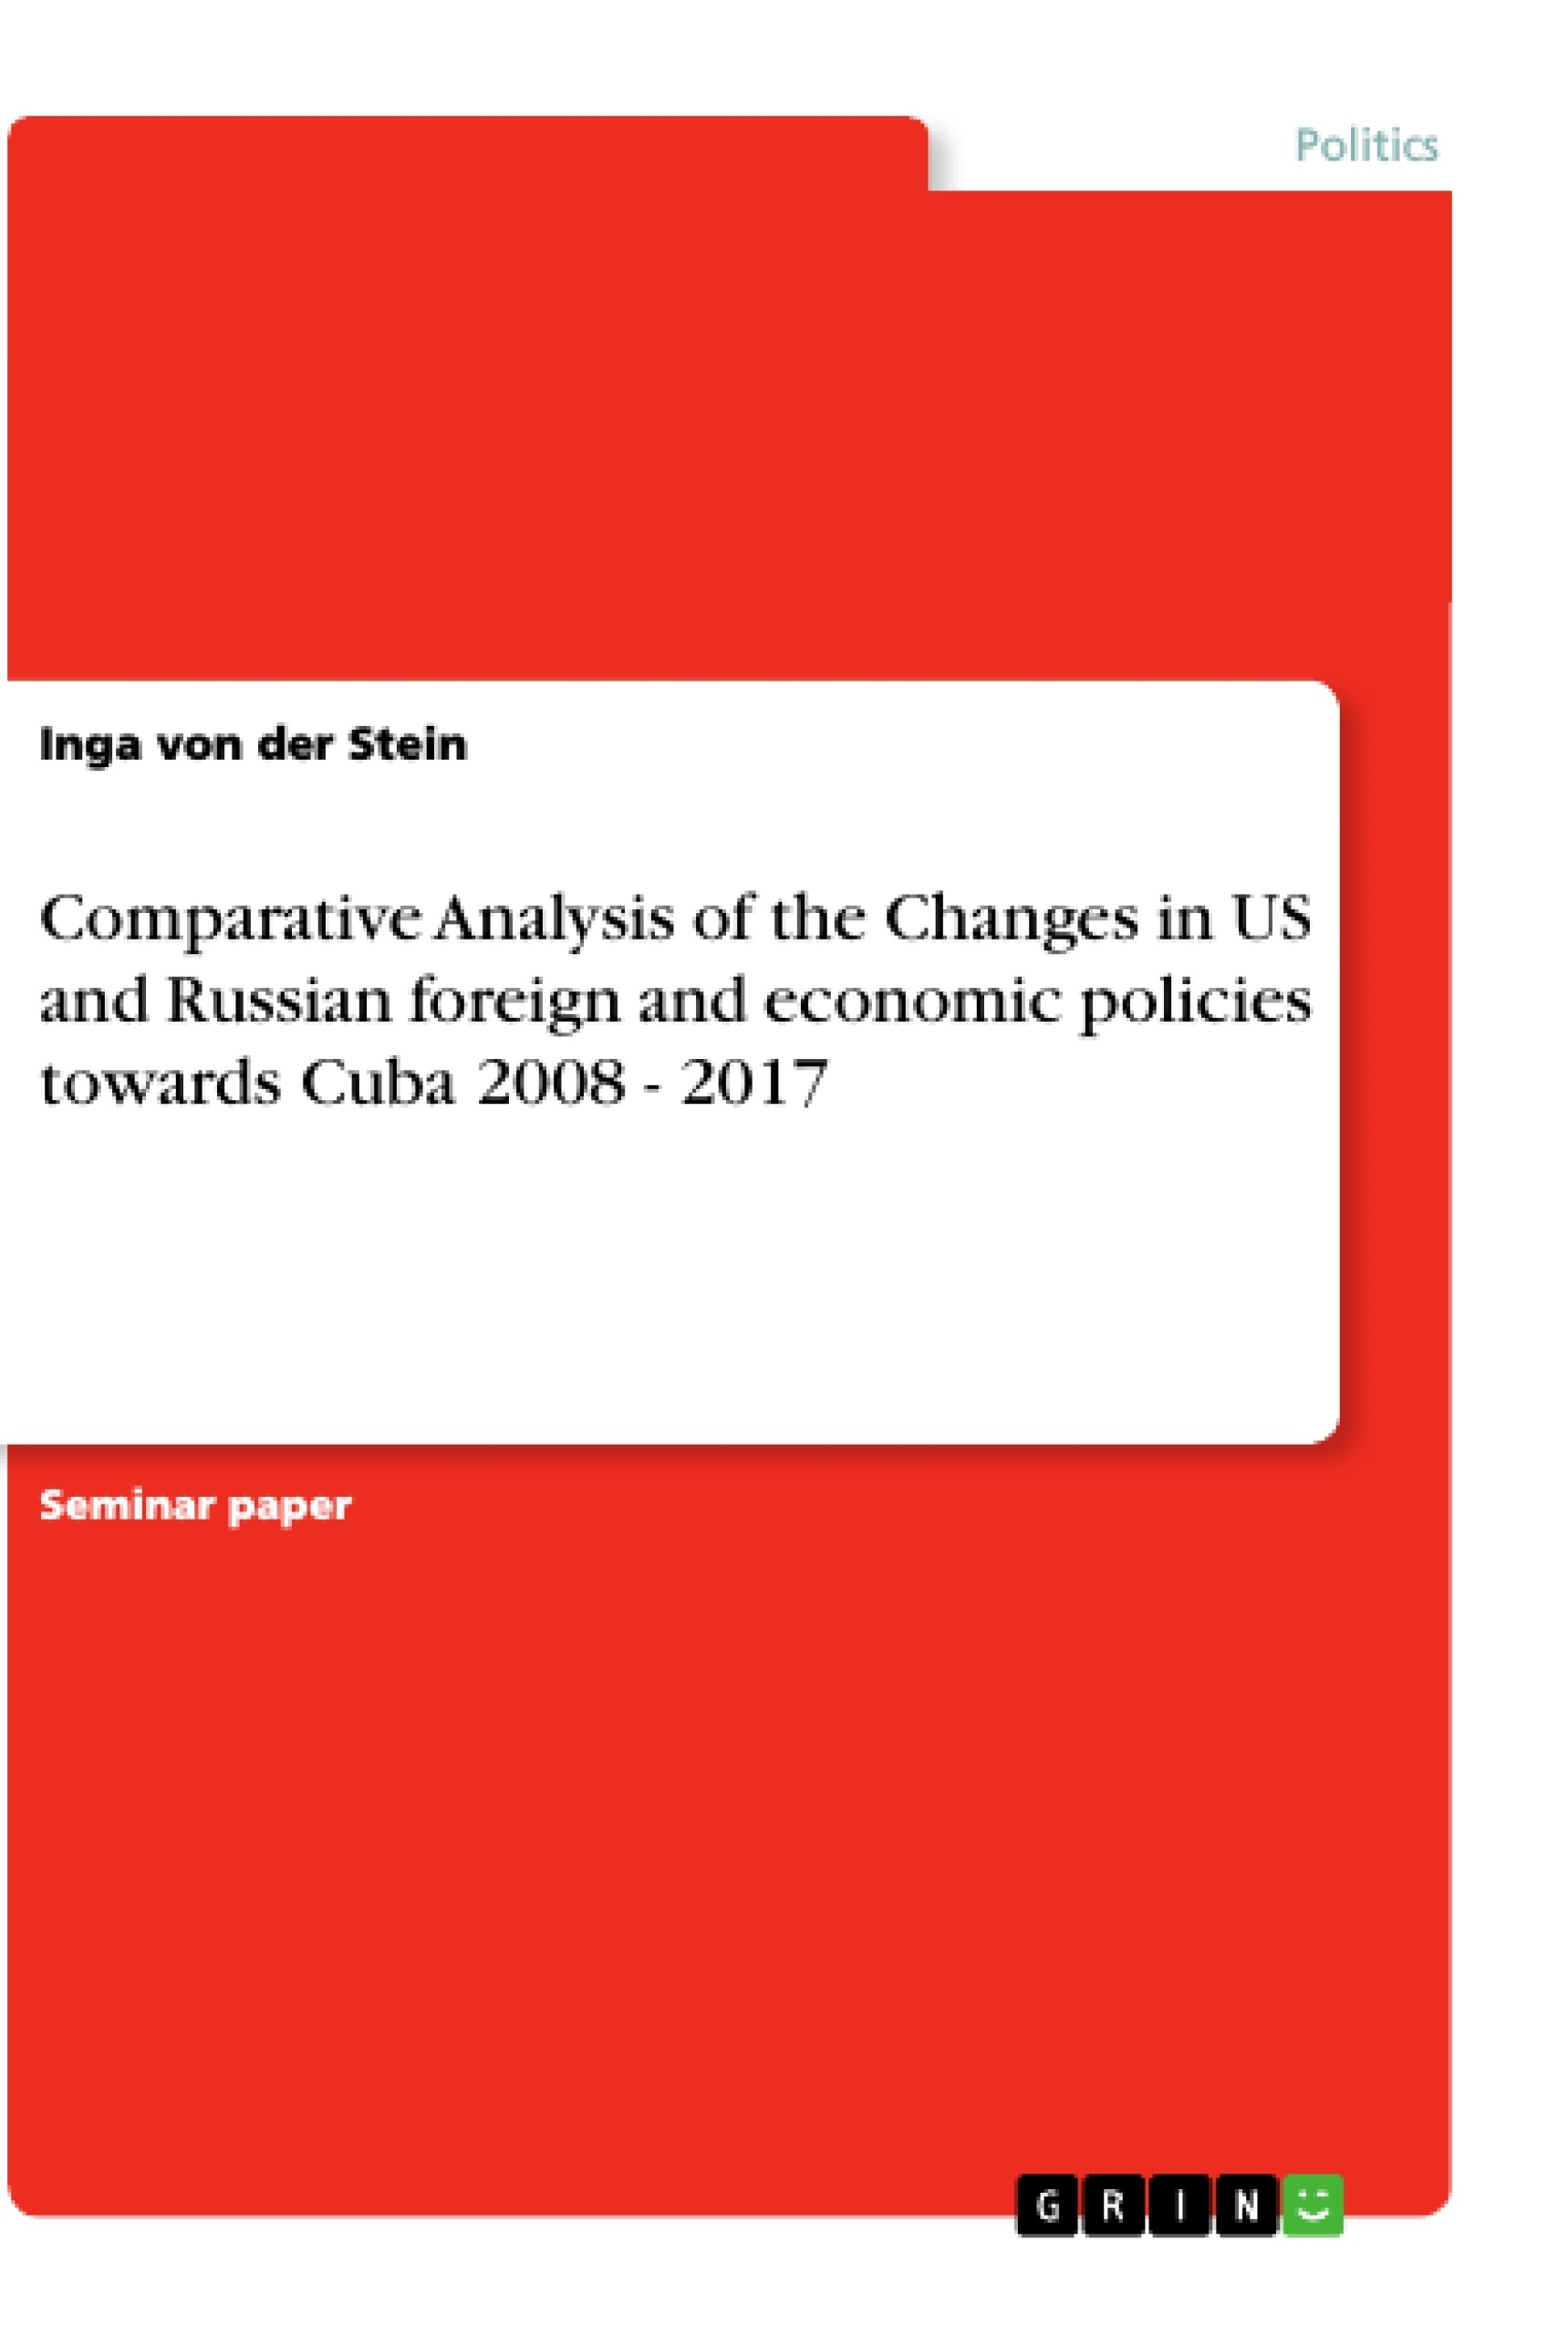 Title: Comparative Analysis of the Changes in US and Russian foreign and economic policies towards Cuba 2008 - 2017